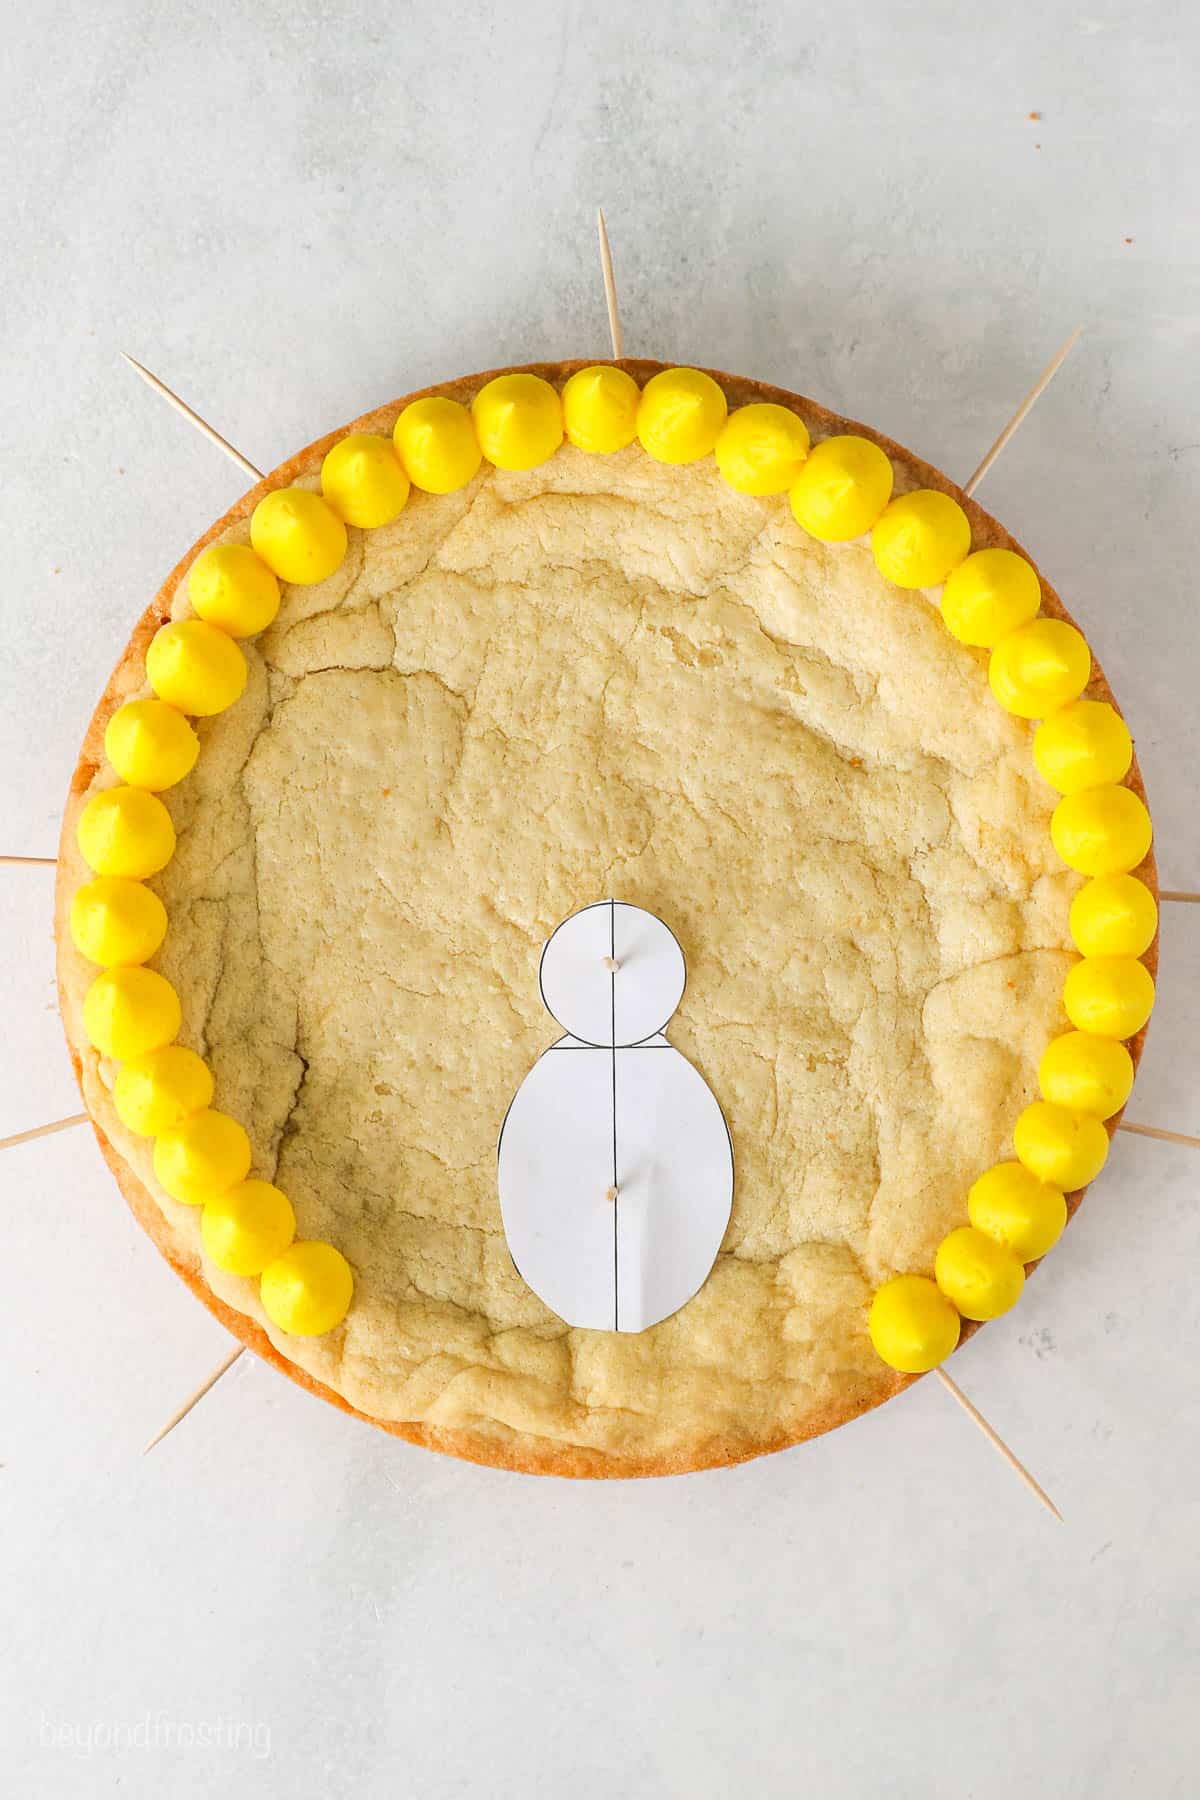 Overhead view of a cookie cake with a row of yellow frosting on the outside